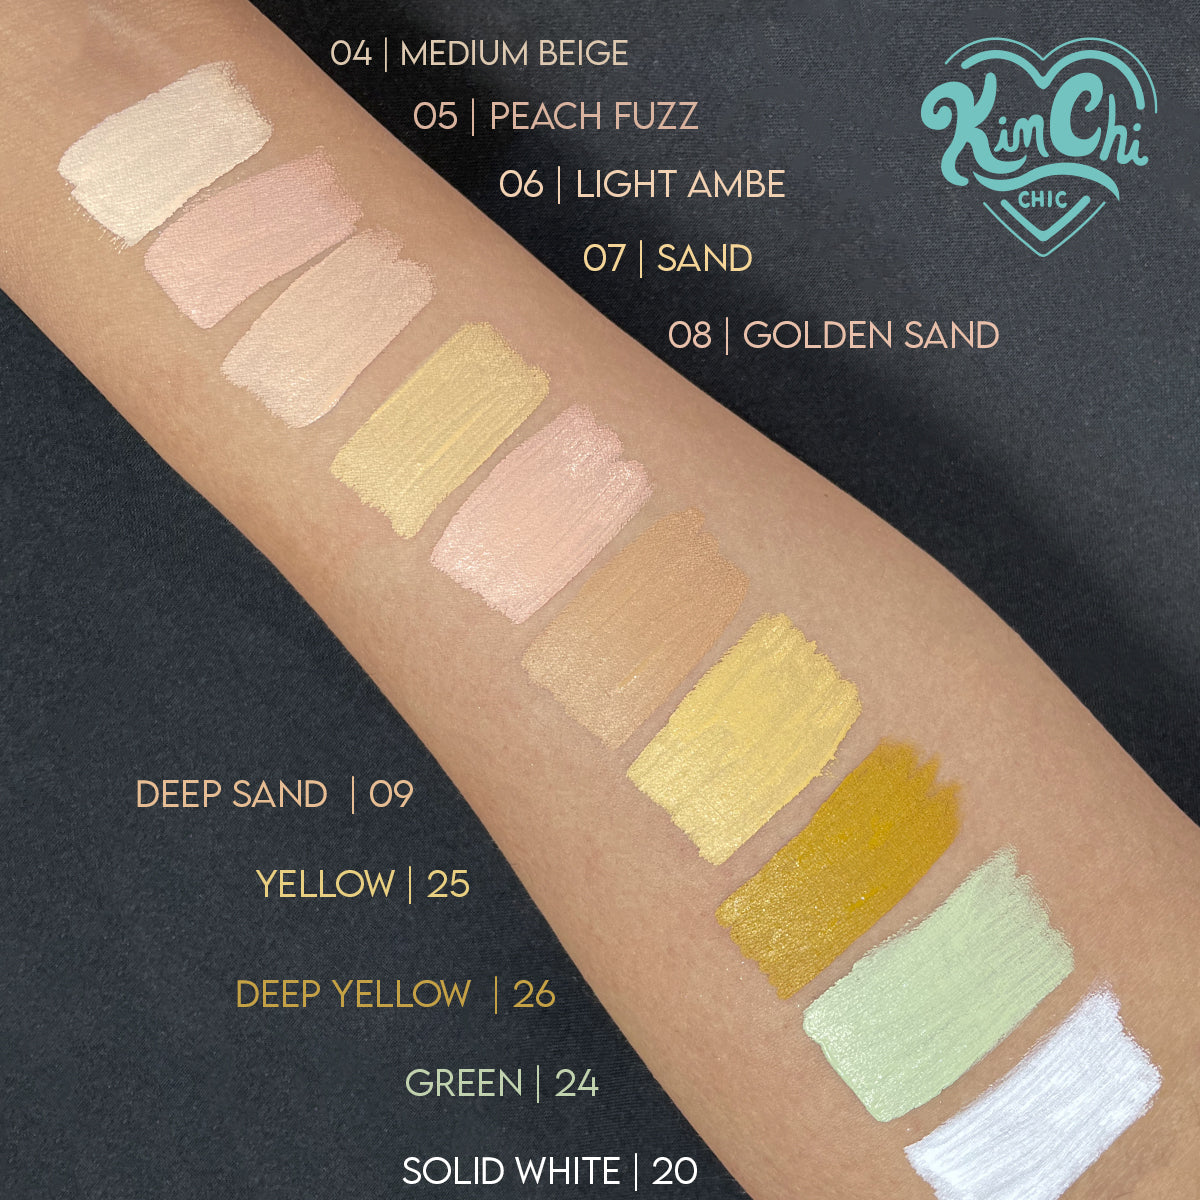 The Most Concealer 26 Deep Yellow